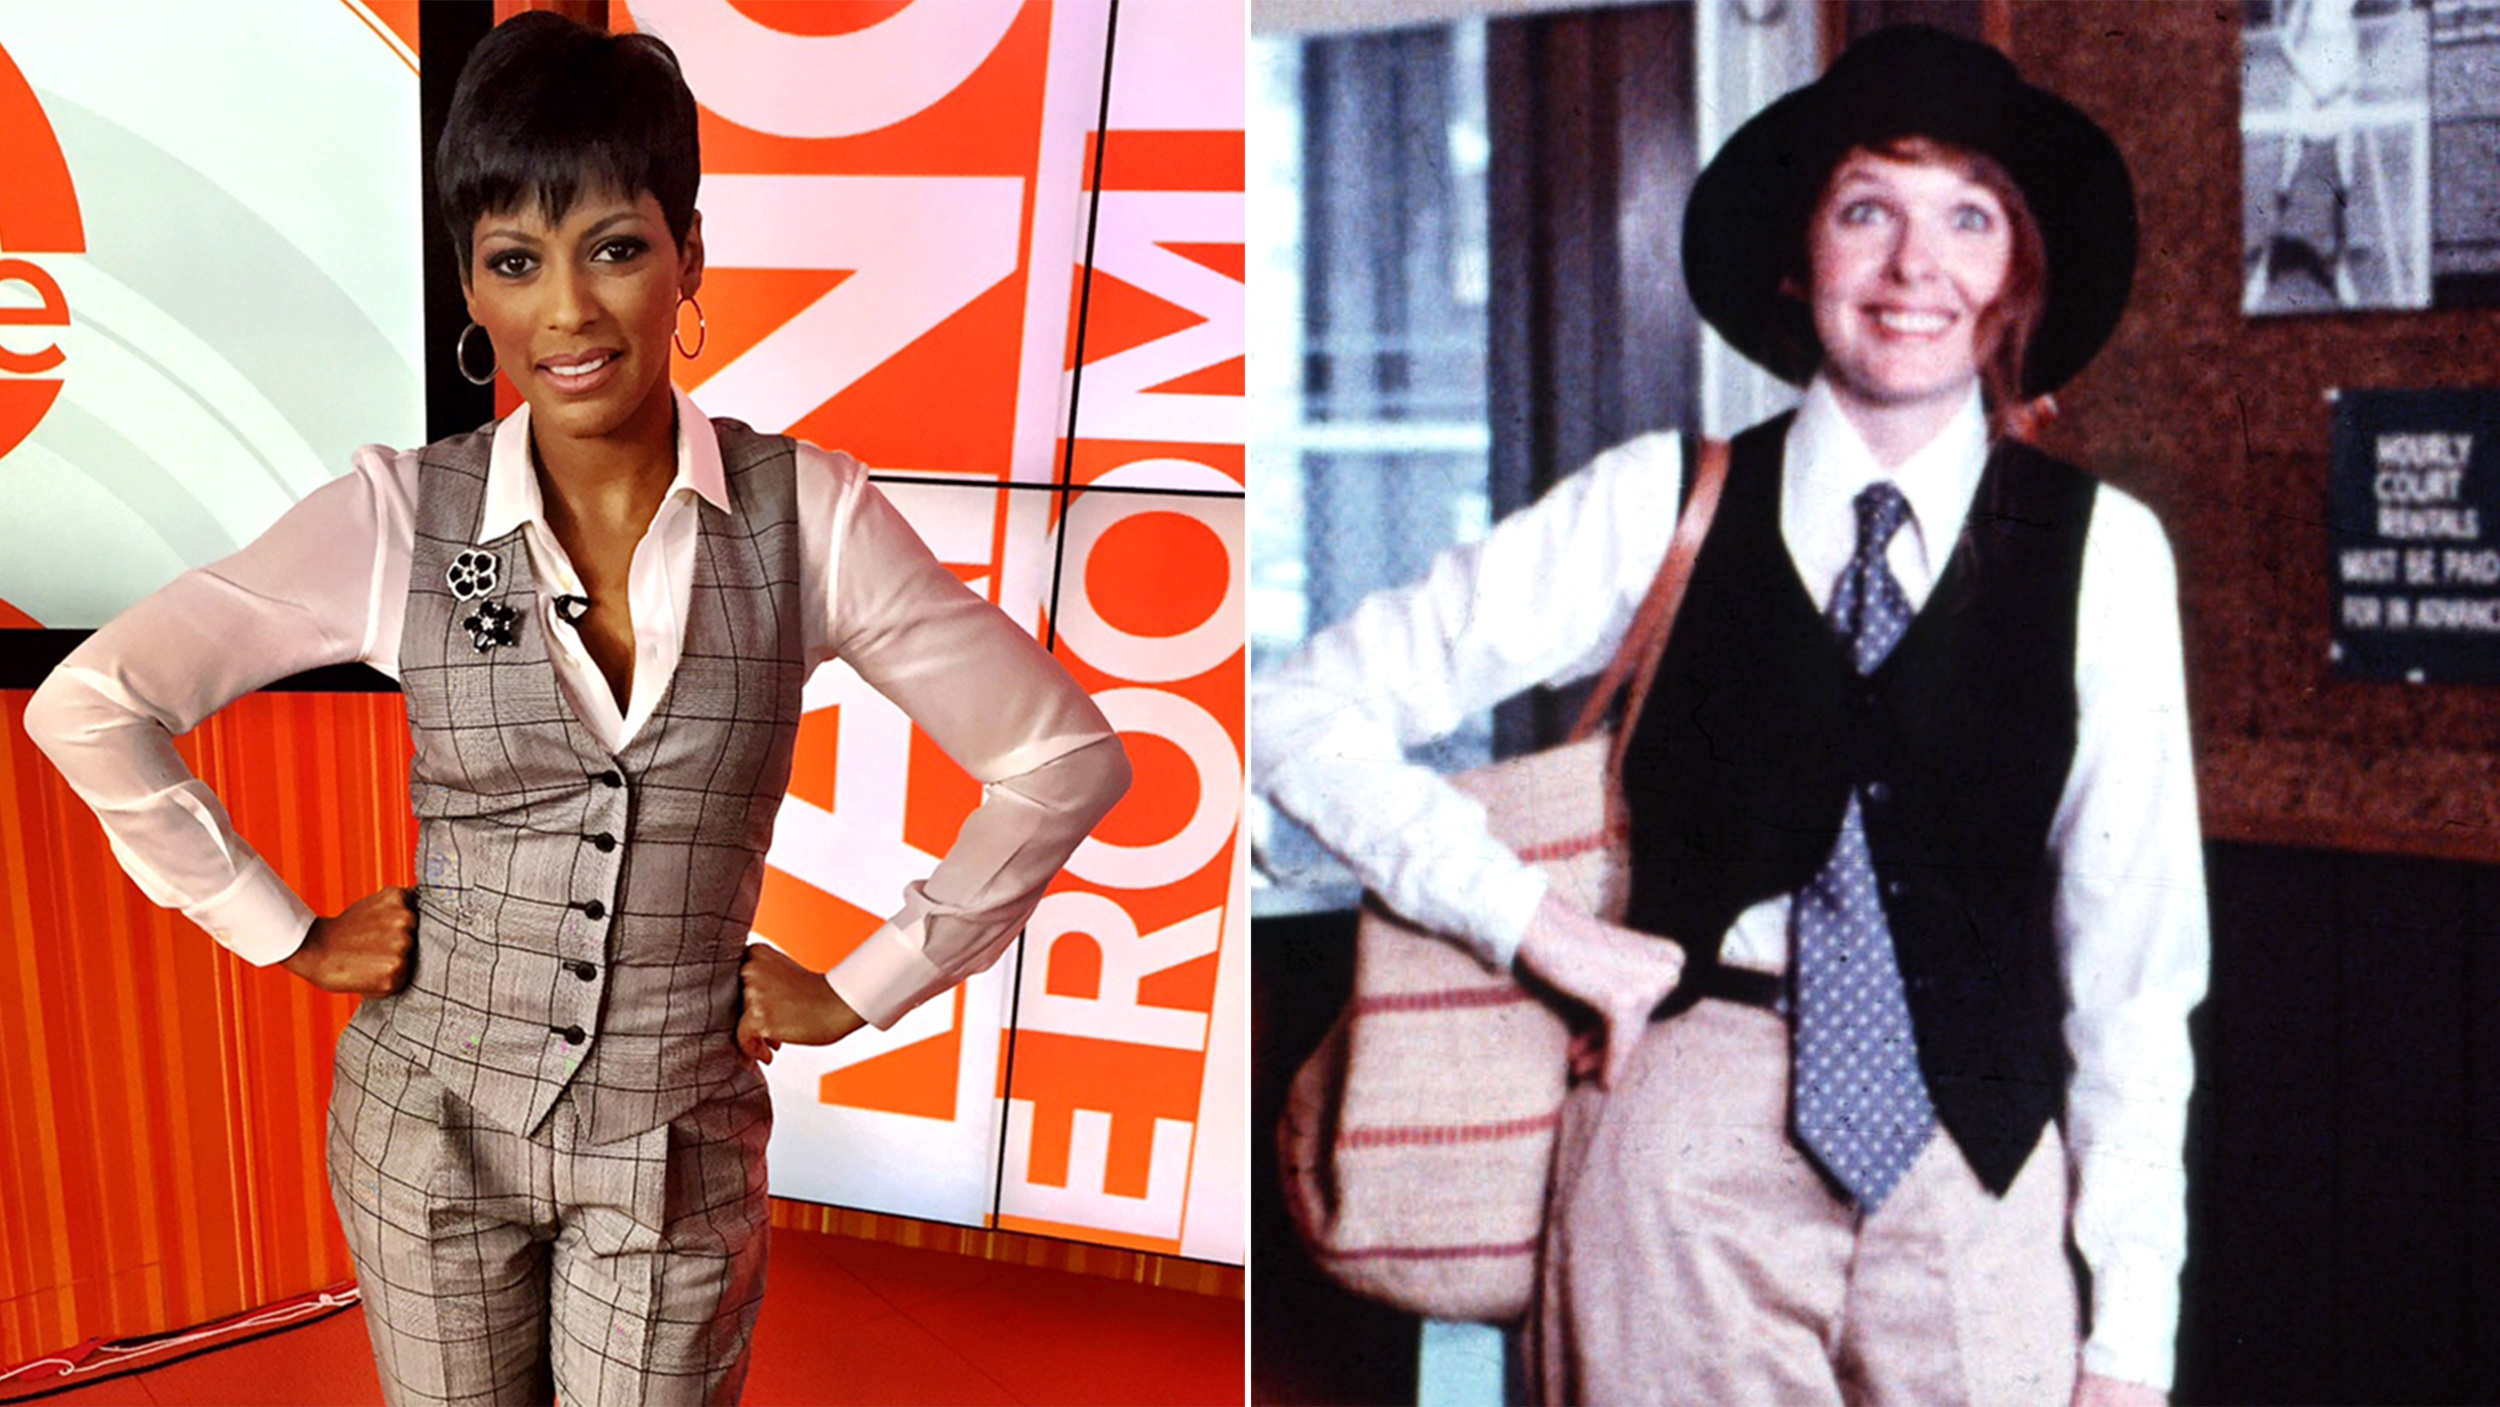 Fashion flashback: Menswear style on celebrities throughout the years